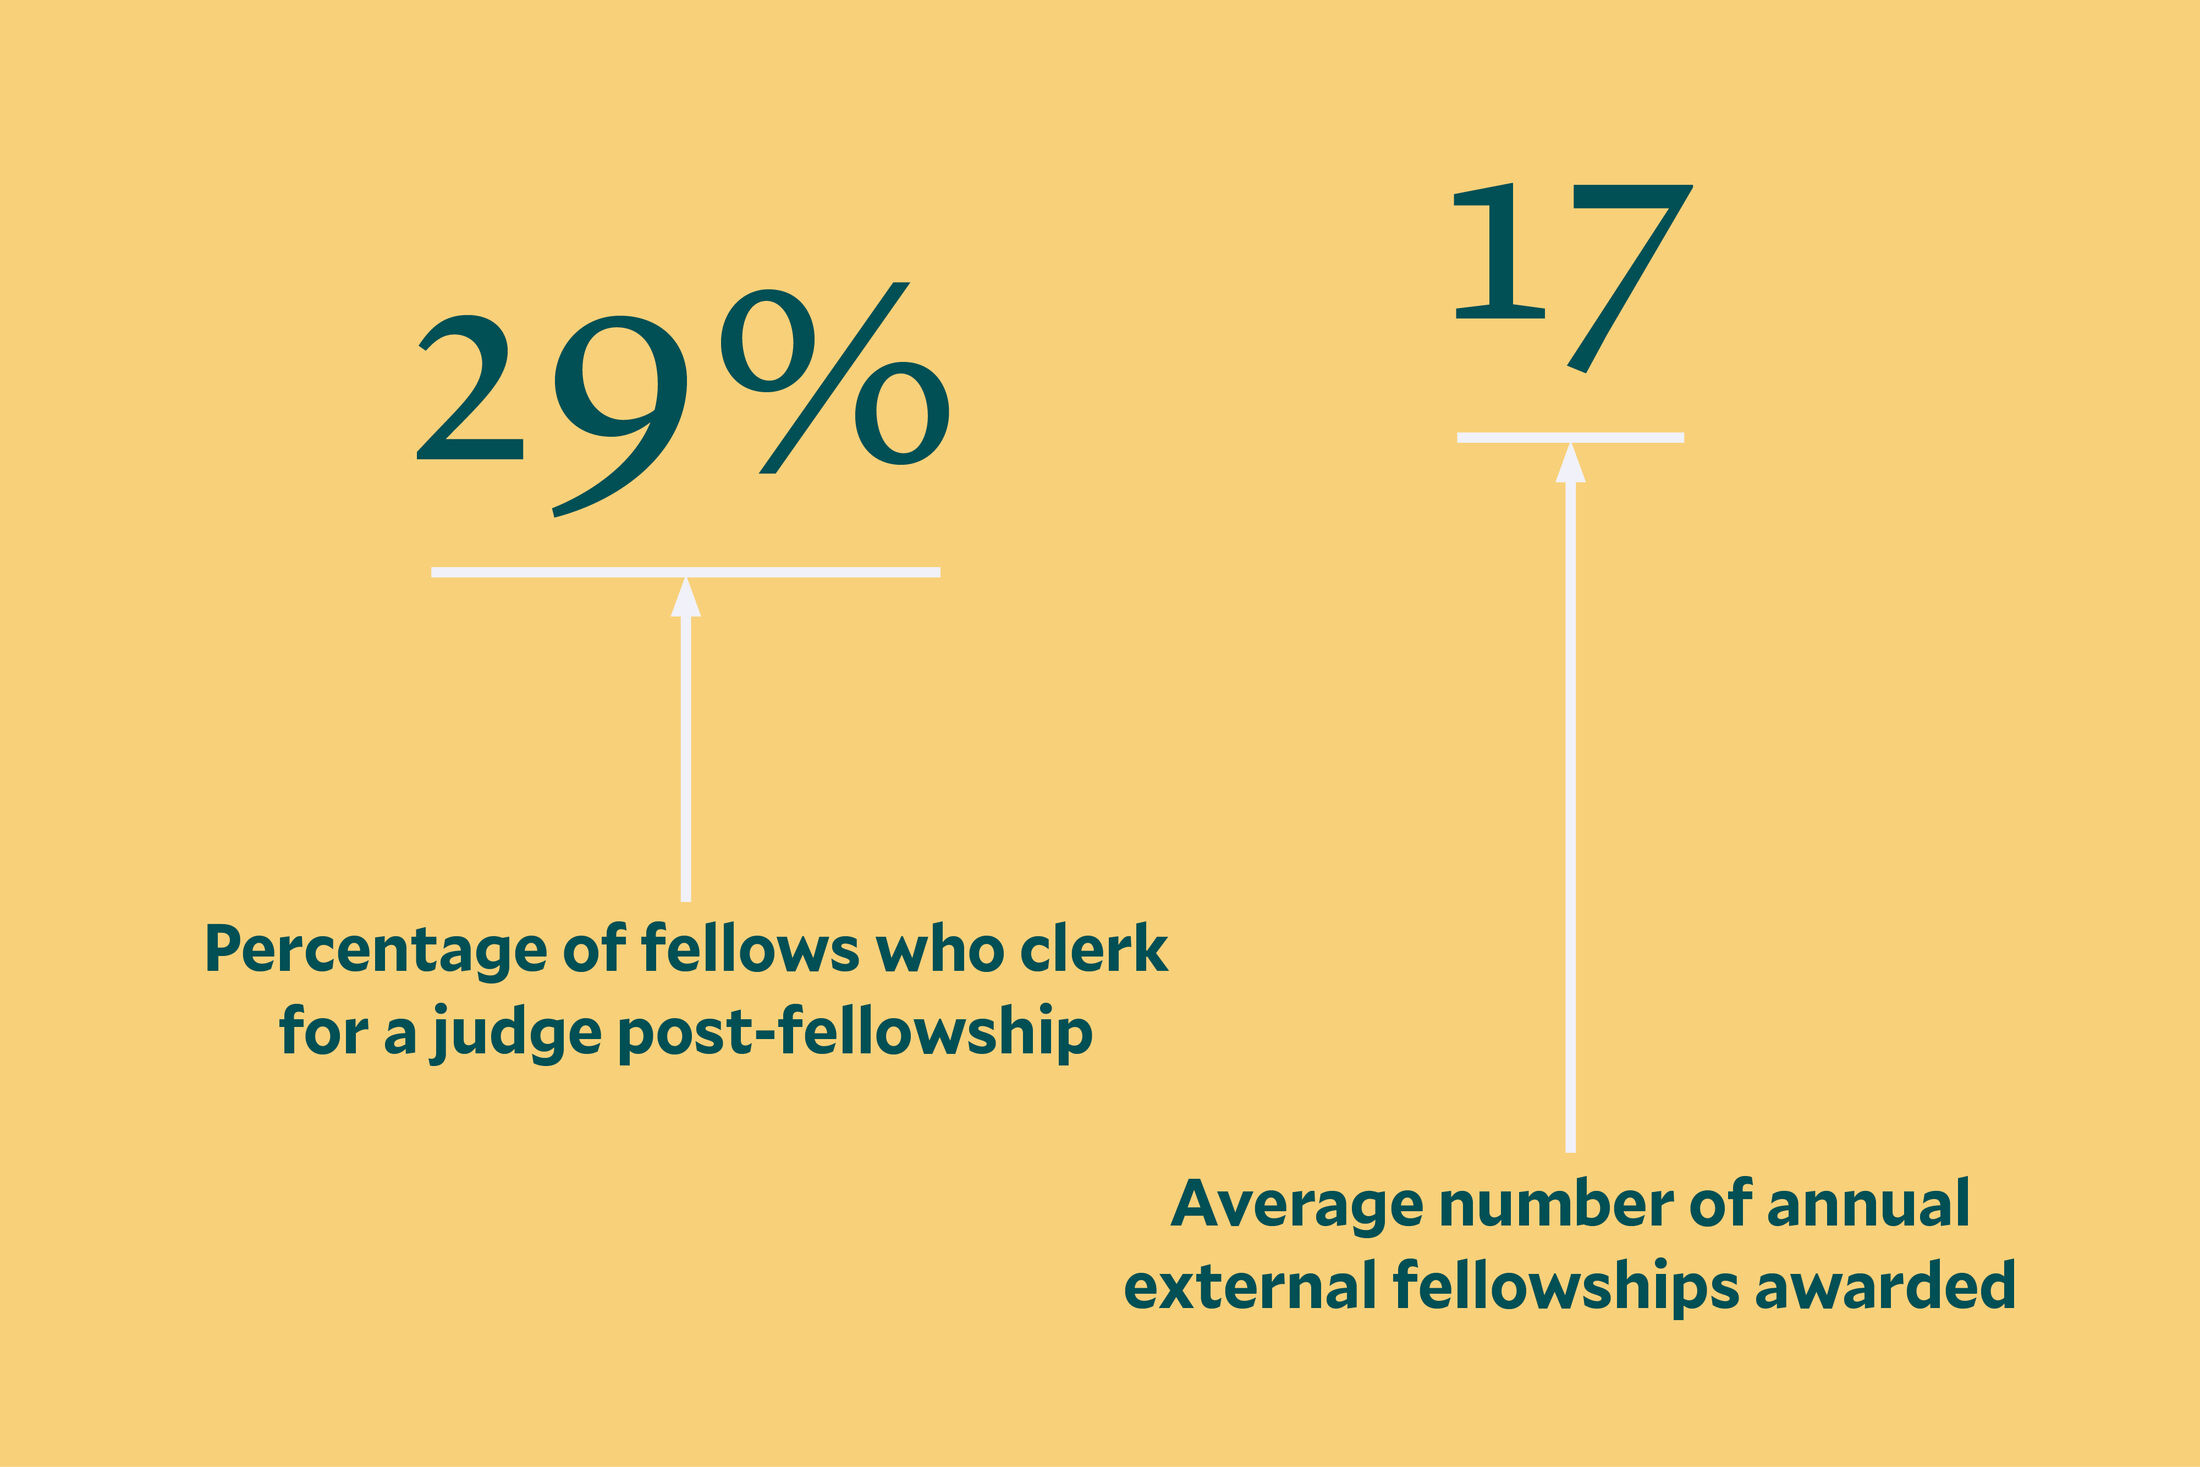 Text with arrows pointing to numbers: "Percentage of fellows who clerk for a judge post-fellowship: 29%" Average number of annual external fellowships awarded: 17"